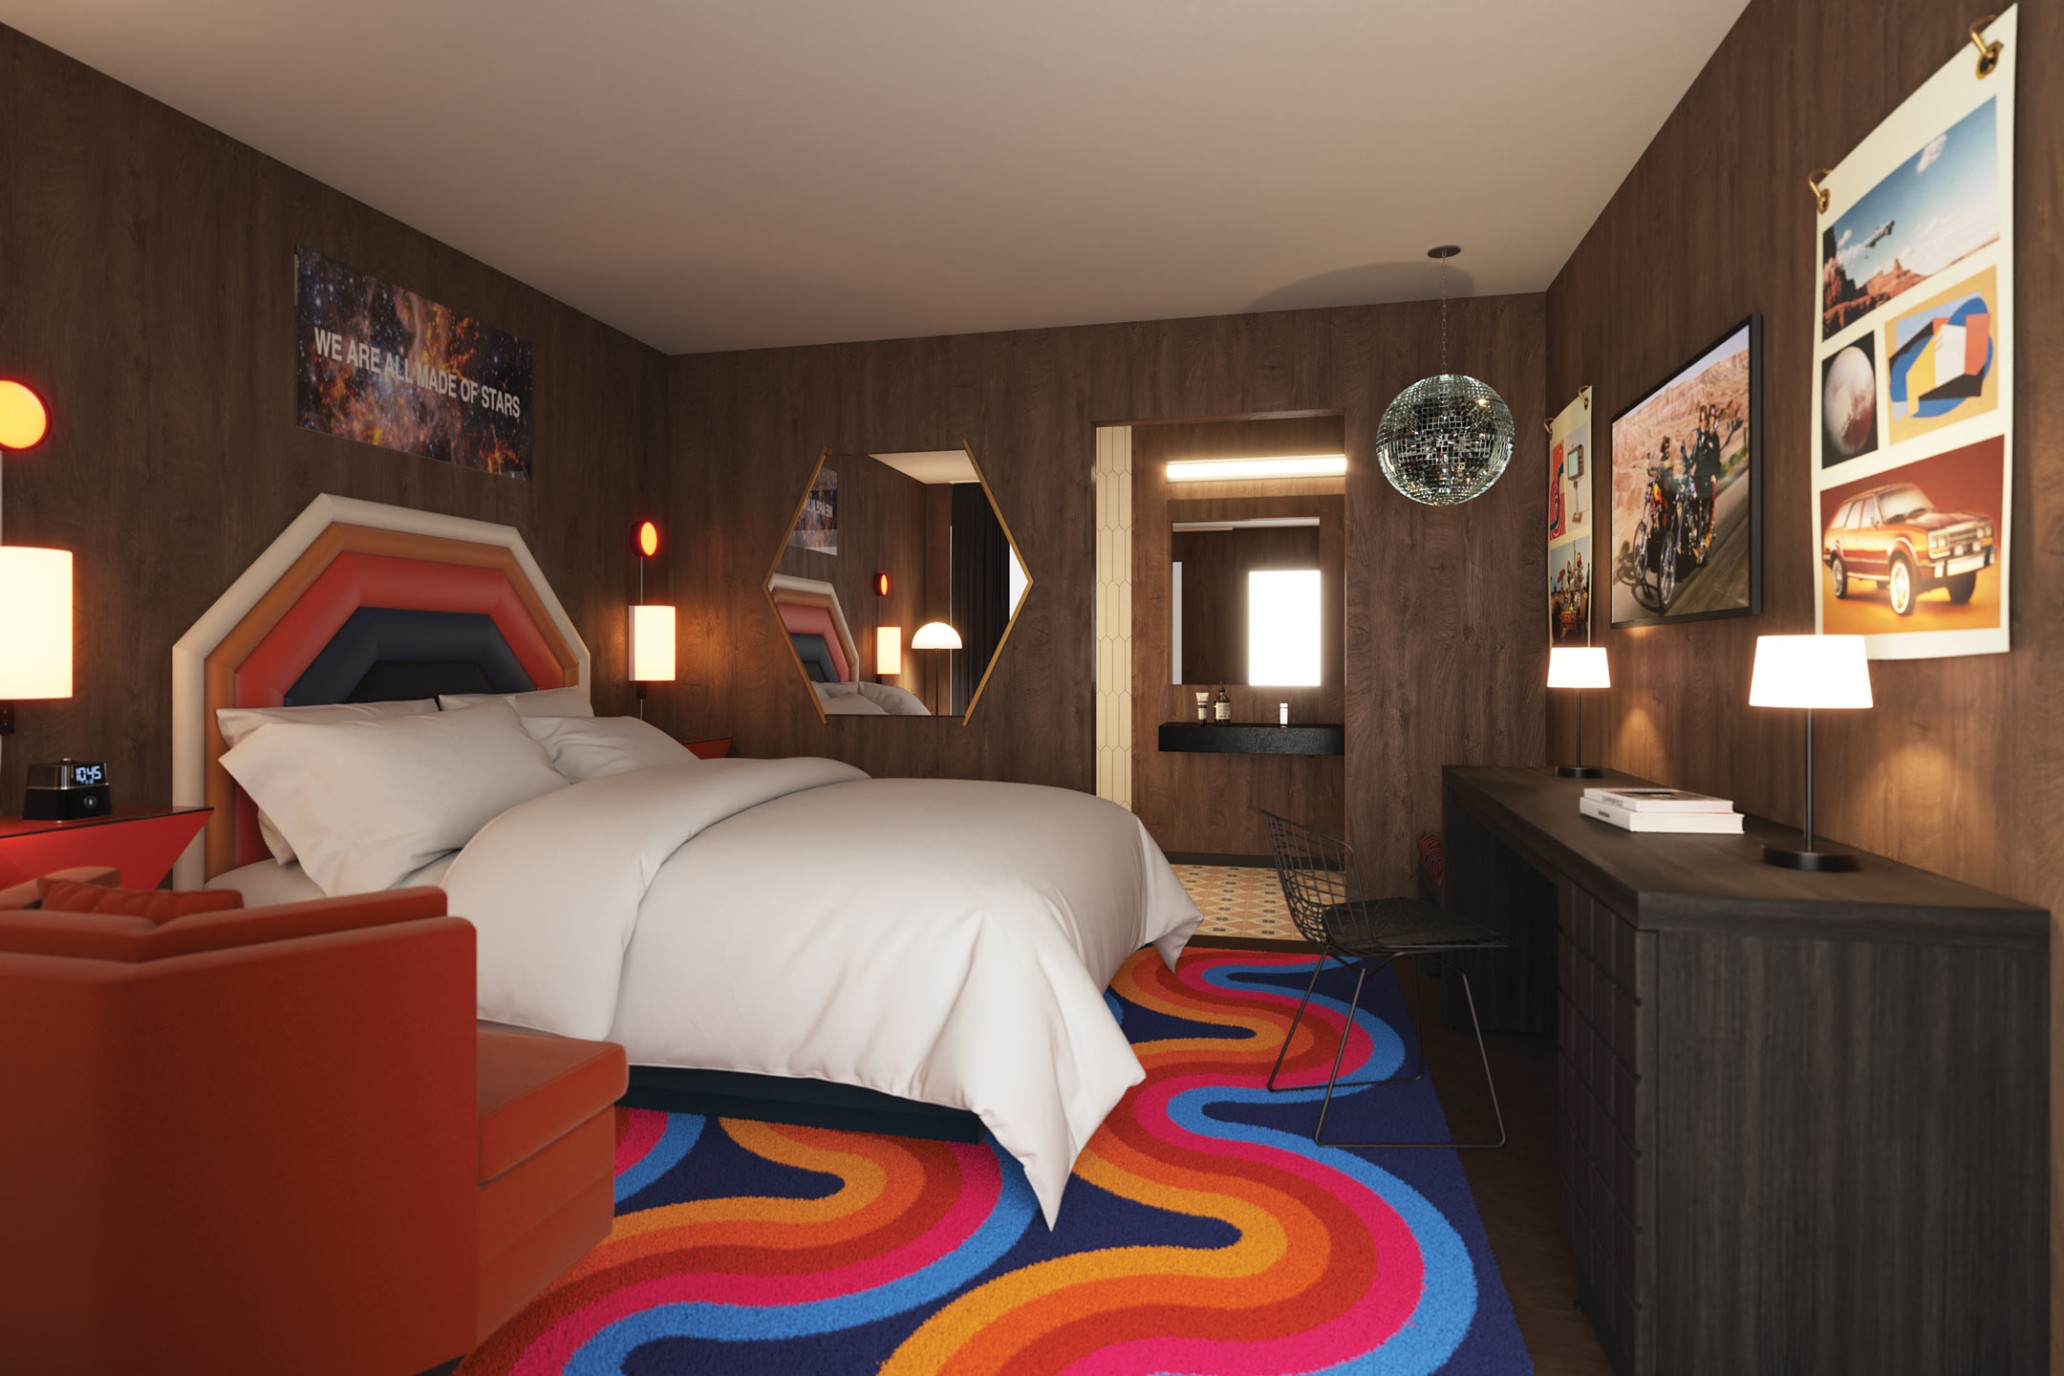 Retro-futuristic motor hotel reopening on Route 66 - Sleeper